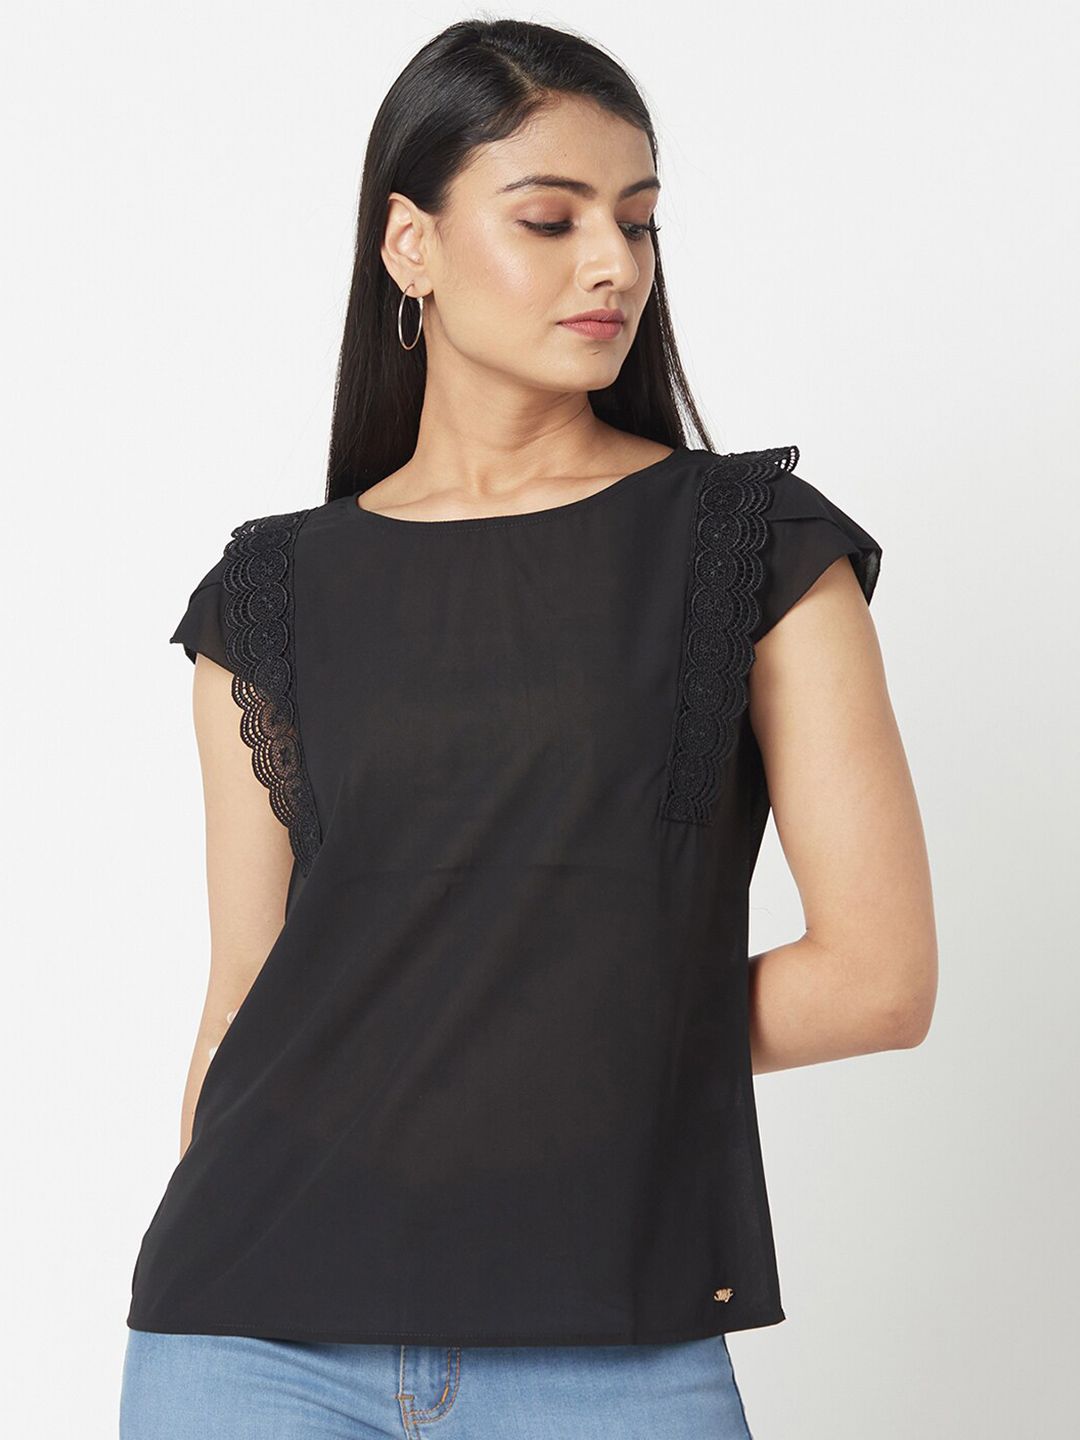 Miss Grace Lace-Up Woven Top Price in India